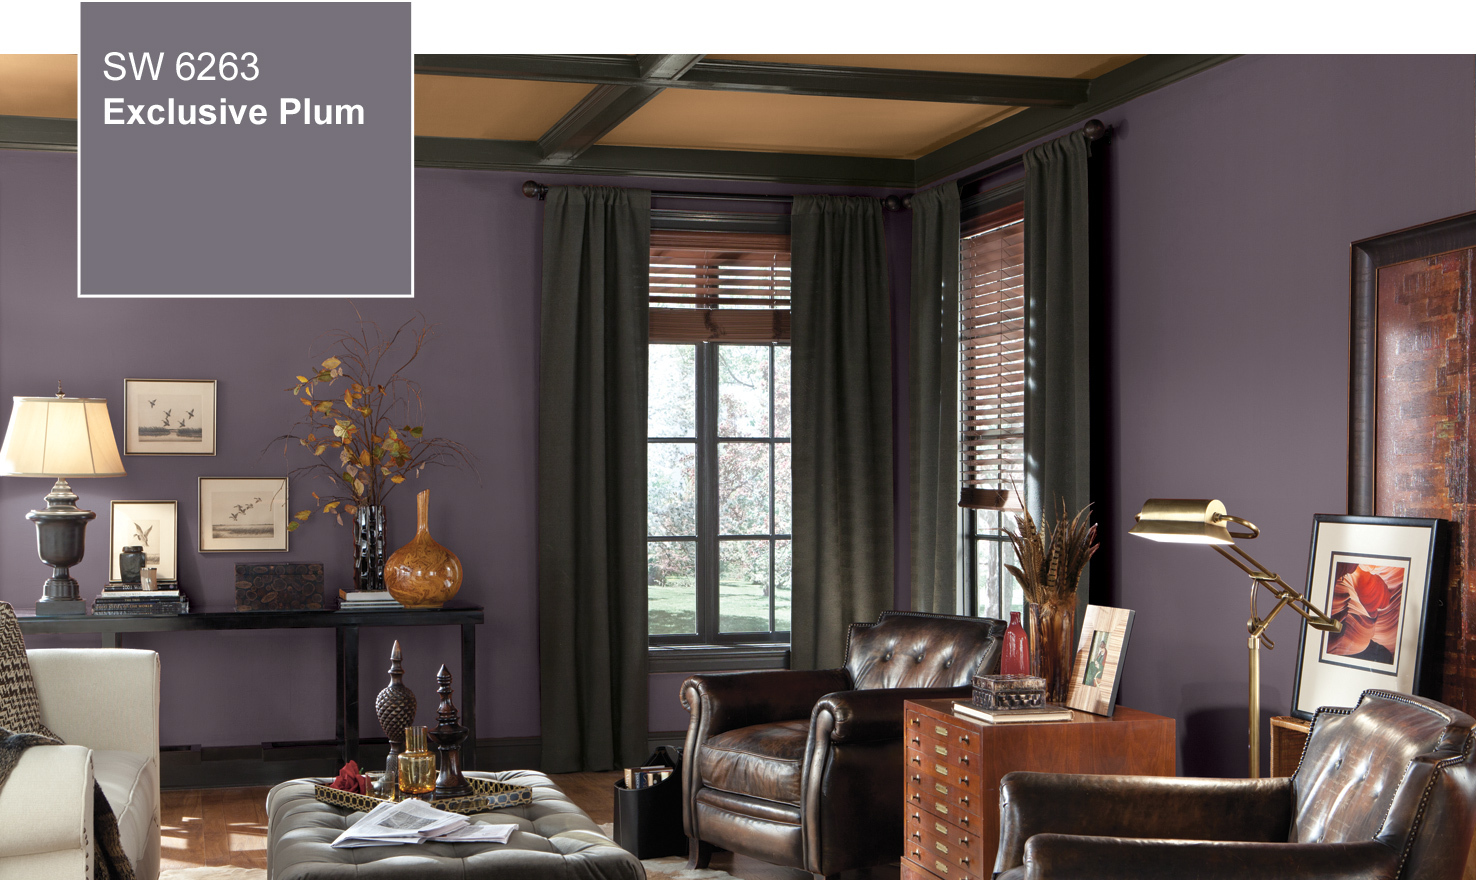 2014 Color Of The Year Exclusive Plum Sw 6263 By Effy Moom Free Coloring Picture wallpaper give a chance to color on the wall without getting in trouble! Fill the walls of your home or office with stress-relieving [effymoom.blogspot.com]